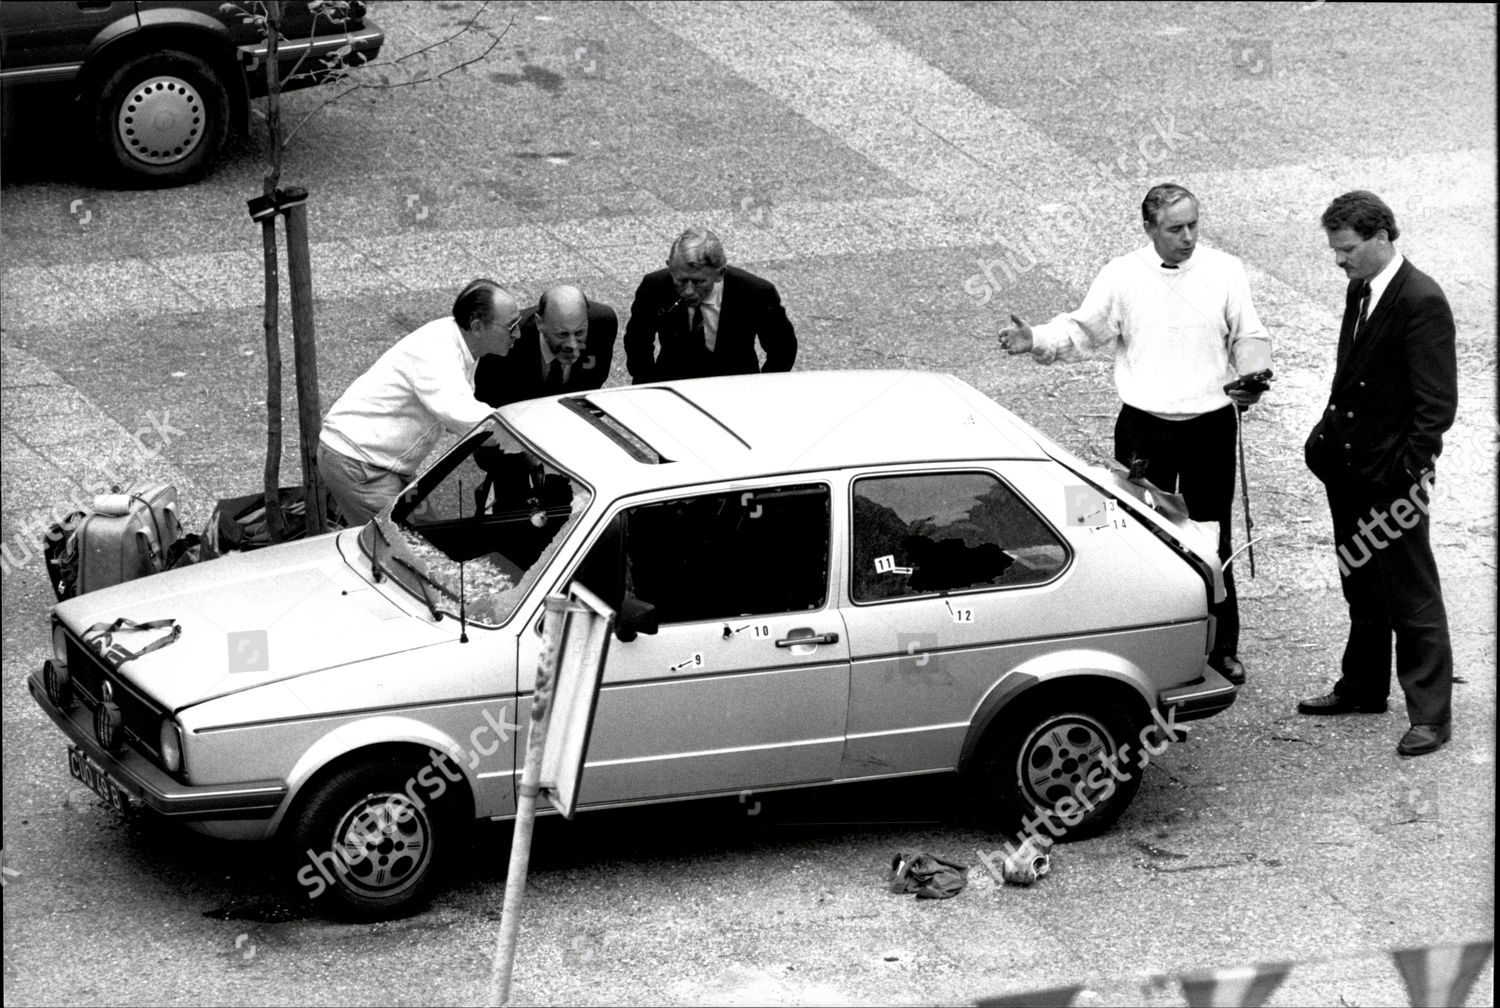 ira-shooting-at-roermont-in-holland-forensics-examine-the-vw-golf-in-which-serviceman-ian-shinner-was-killed-shutterstock-editorial-3027827a.jpg